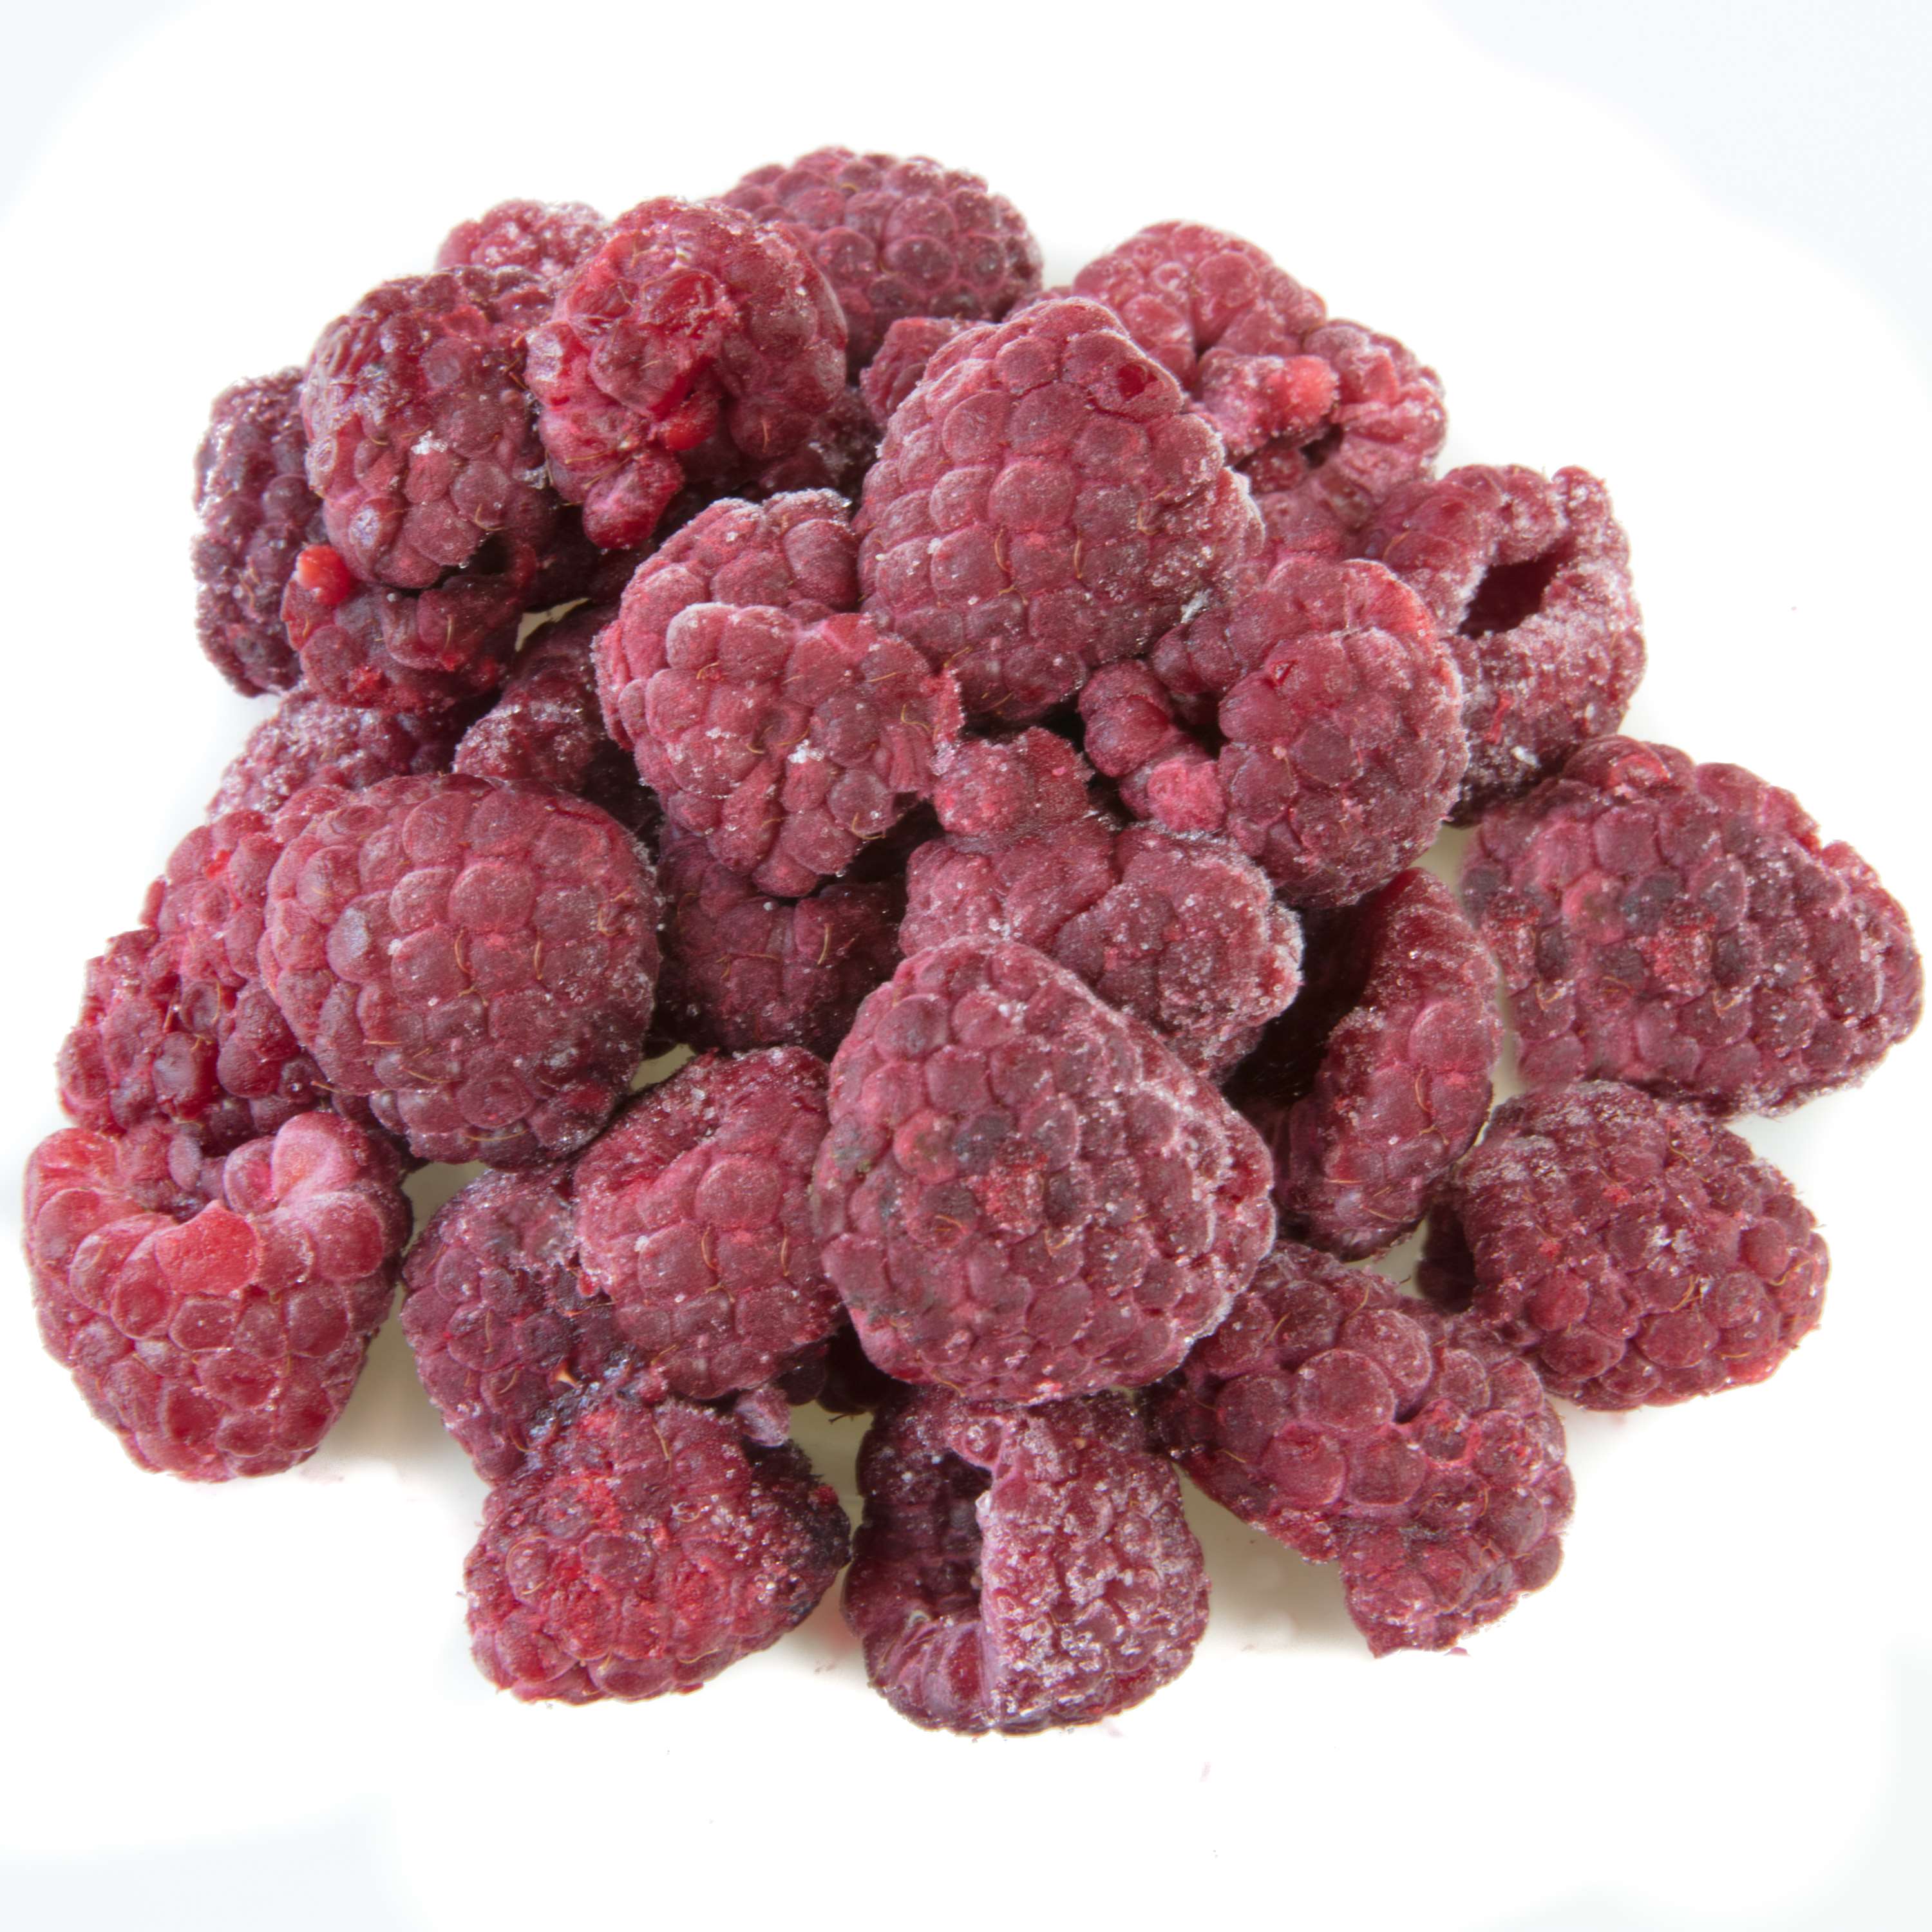 IQF Raspberries 1/10lb - Sold by PACK